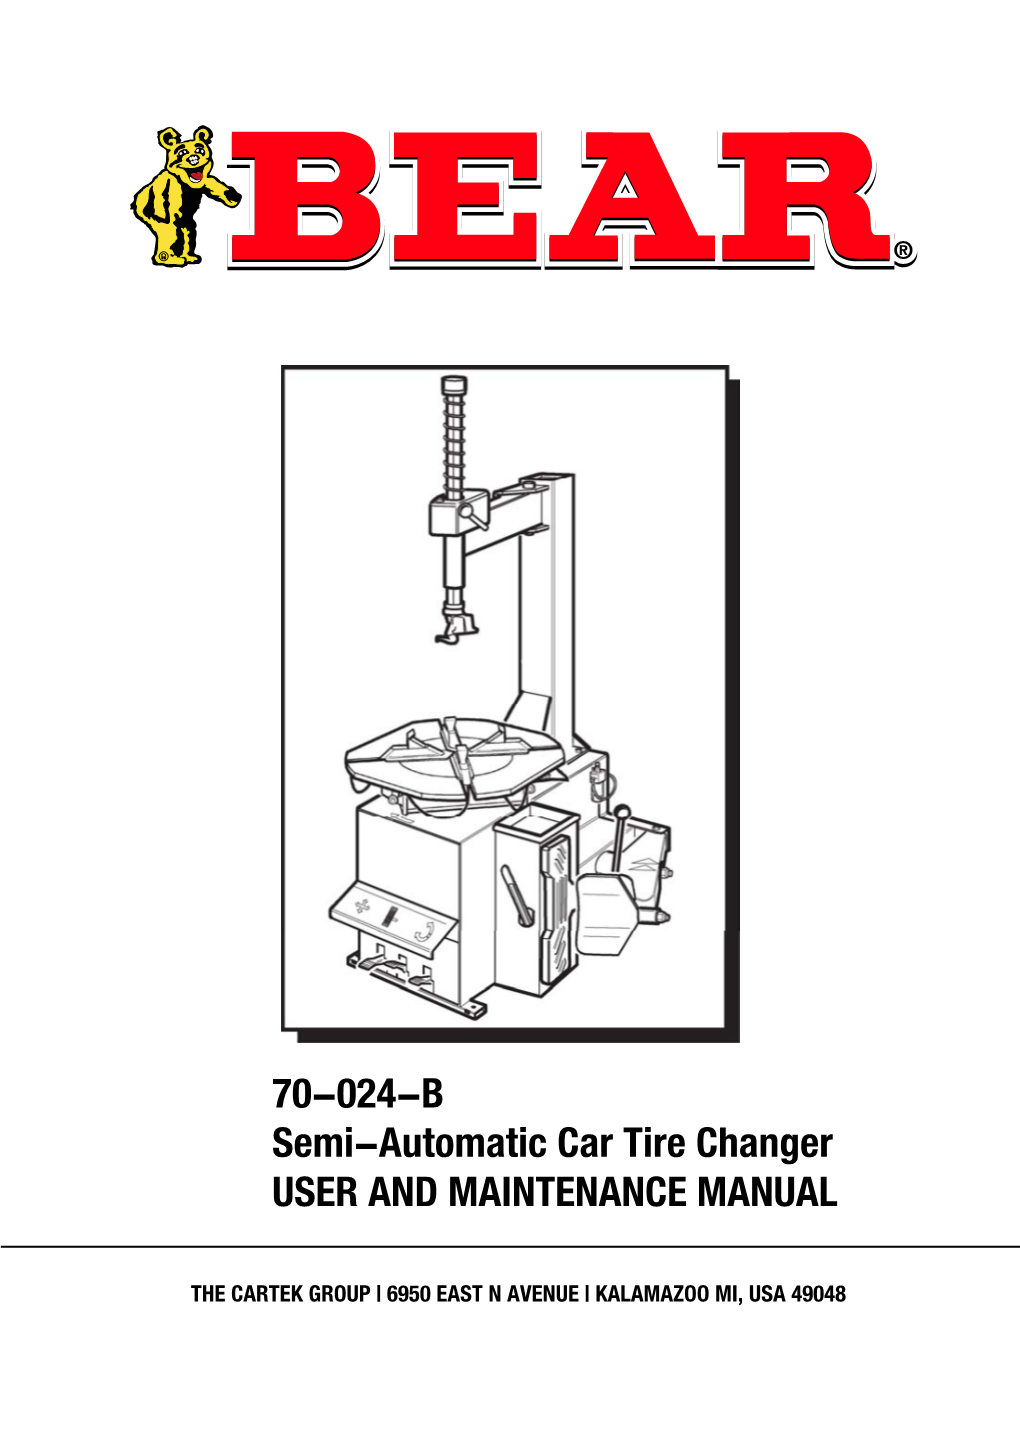 70-024-B Semi-Automatic Car Tire Changer USER and MAINTENANCE MANUAL